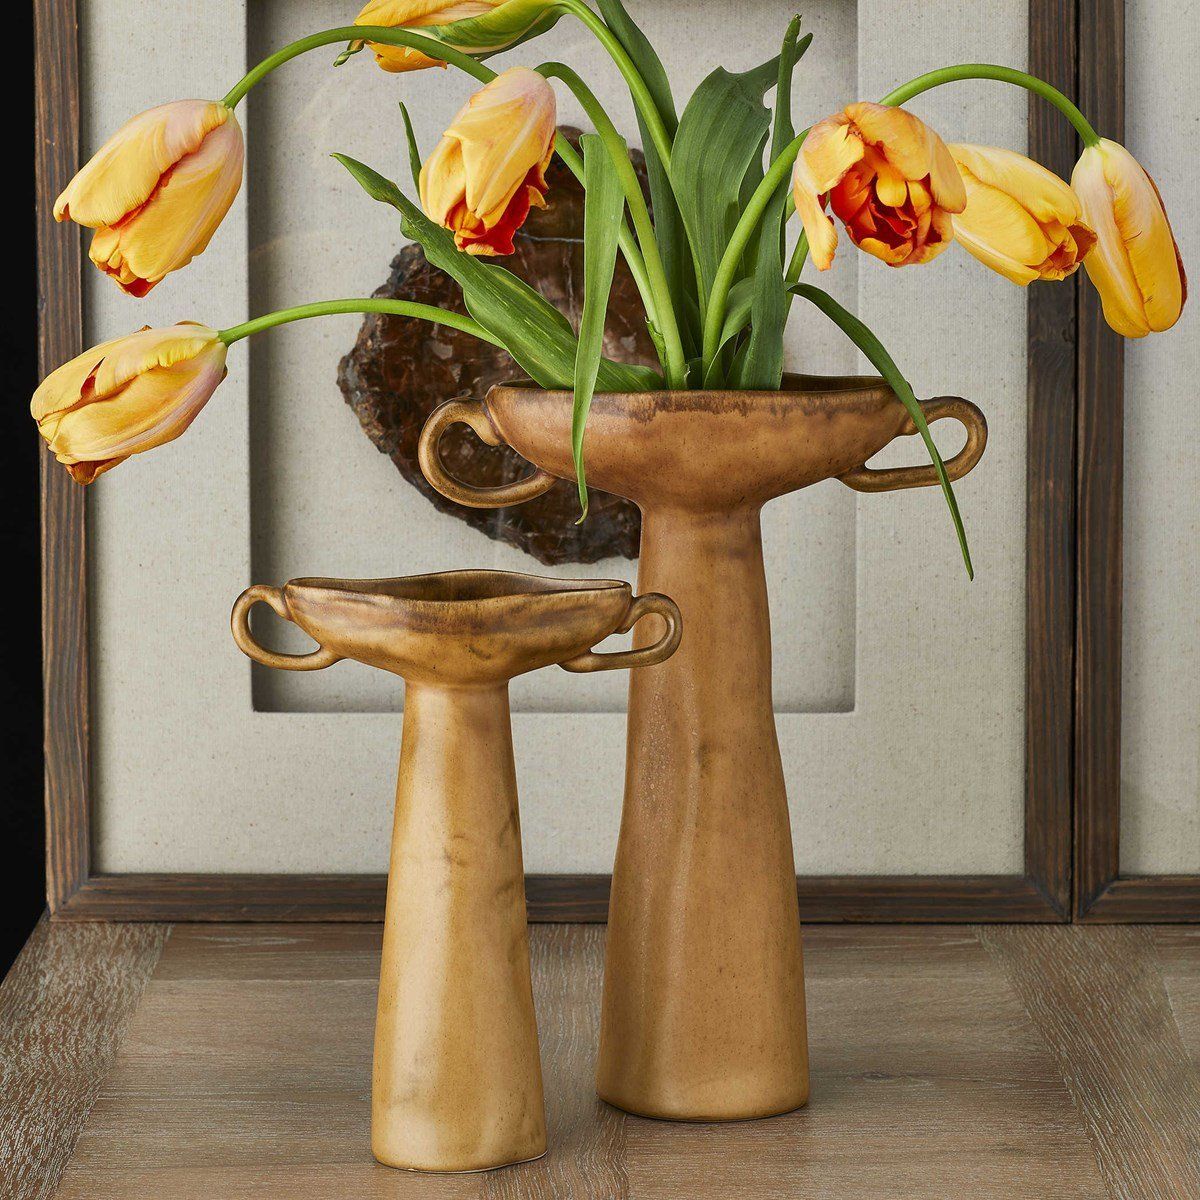 Warped gold vases look chic and retro